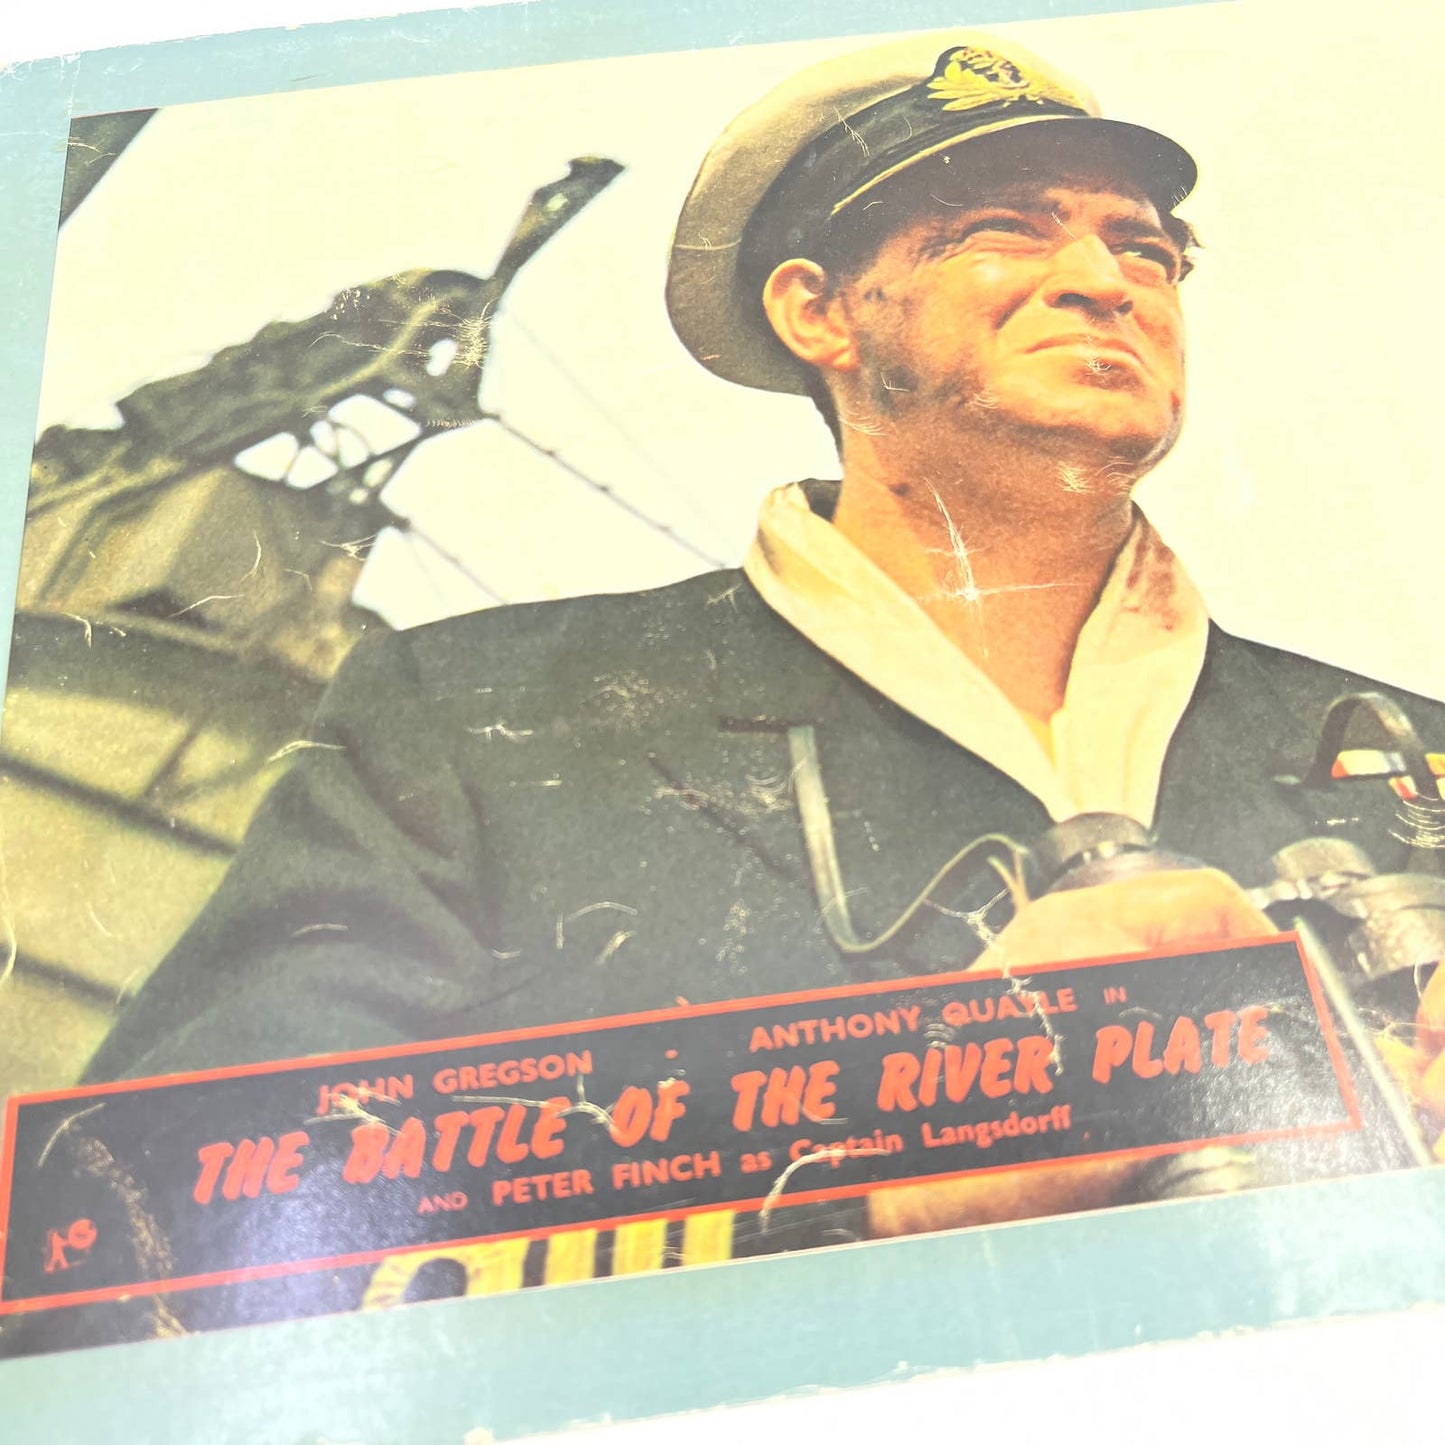 The Battle of The River Plate Peter Finch John Gregson Quayle Lobby Card FL4